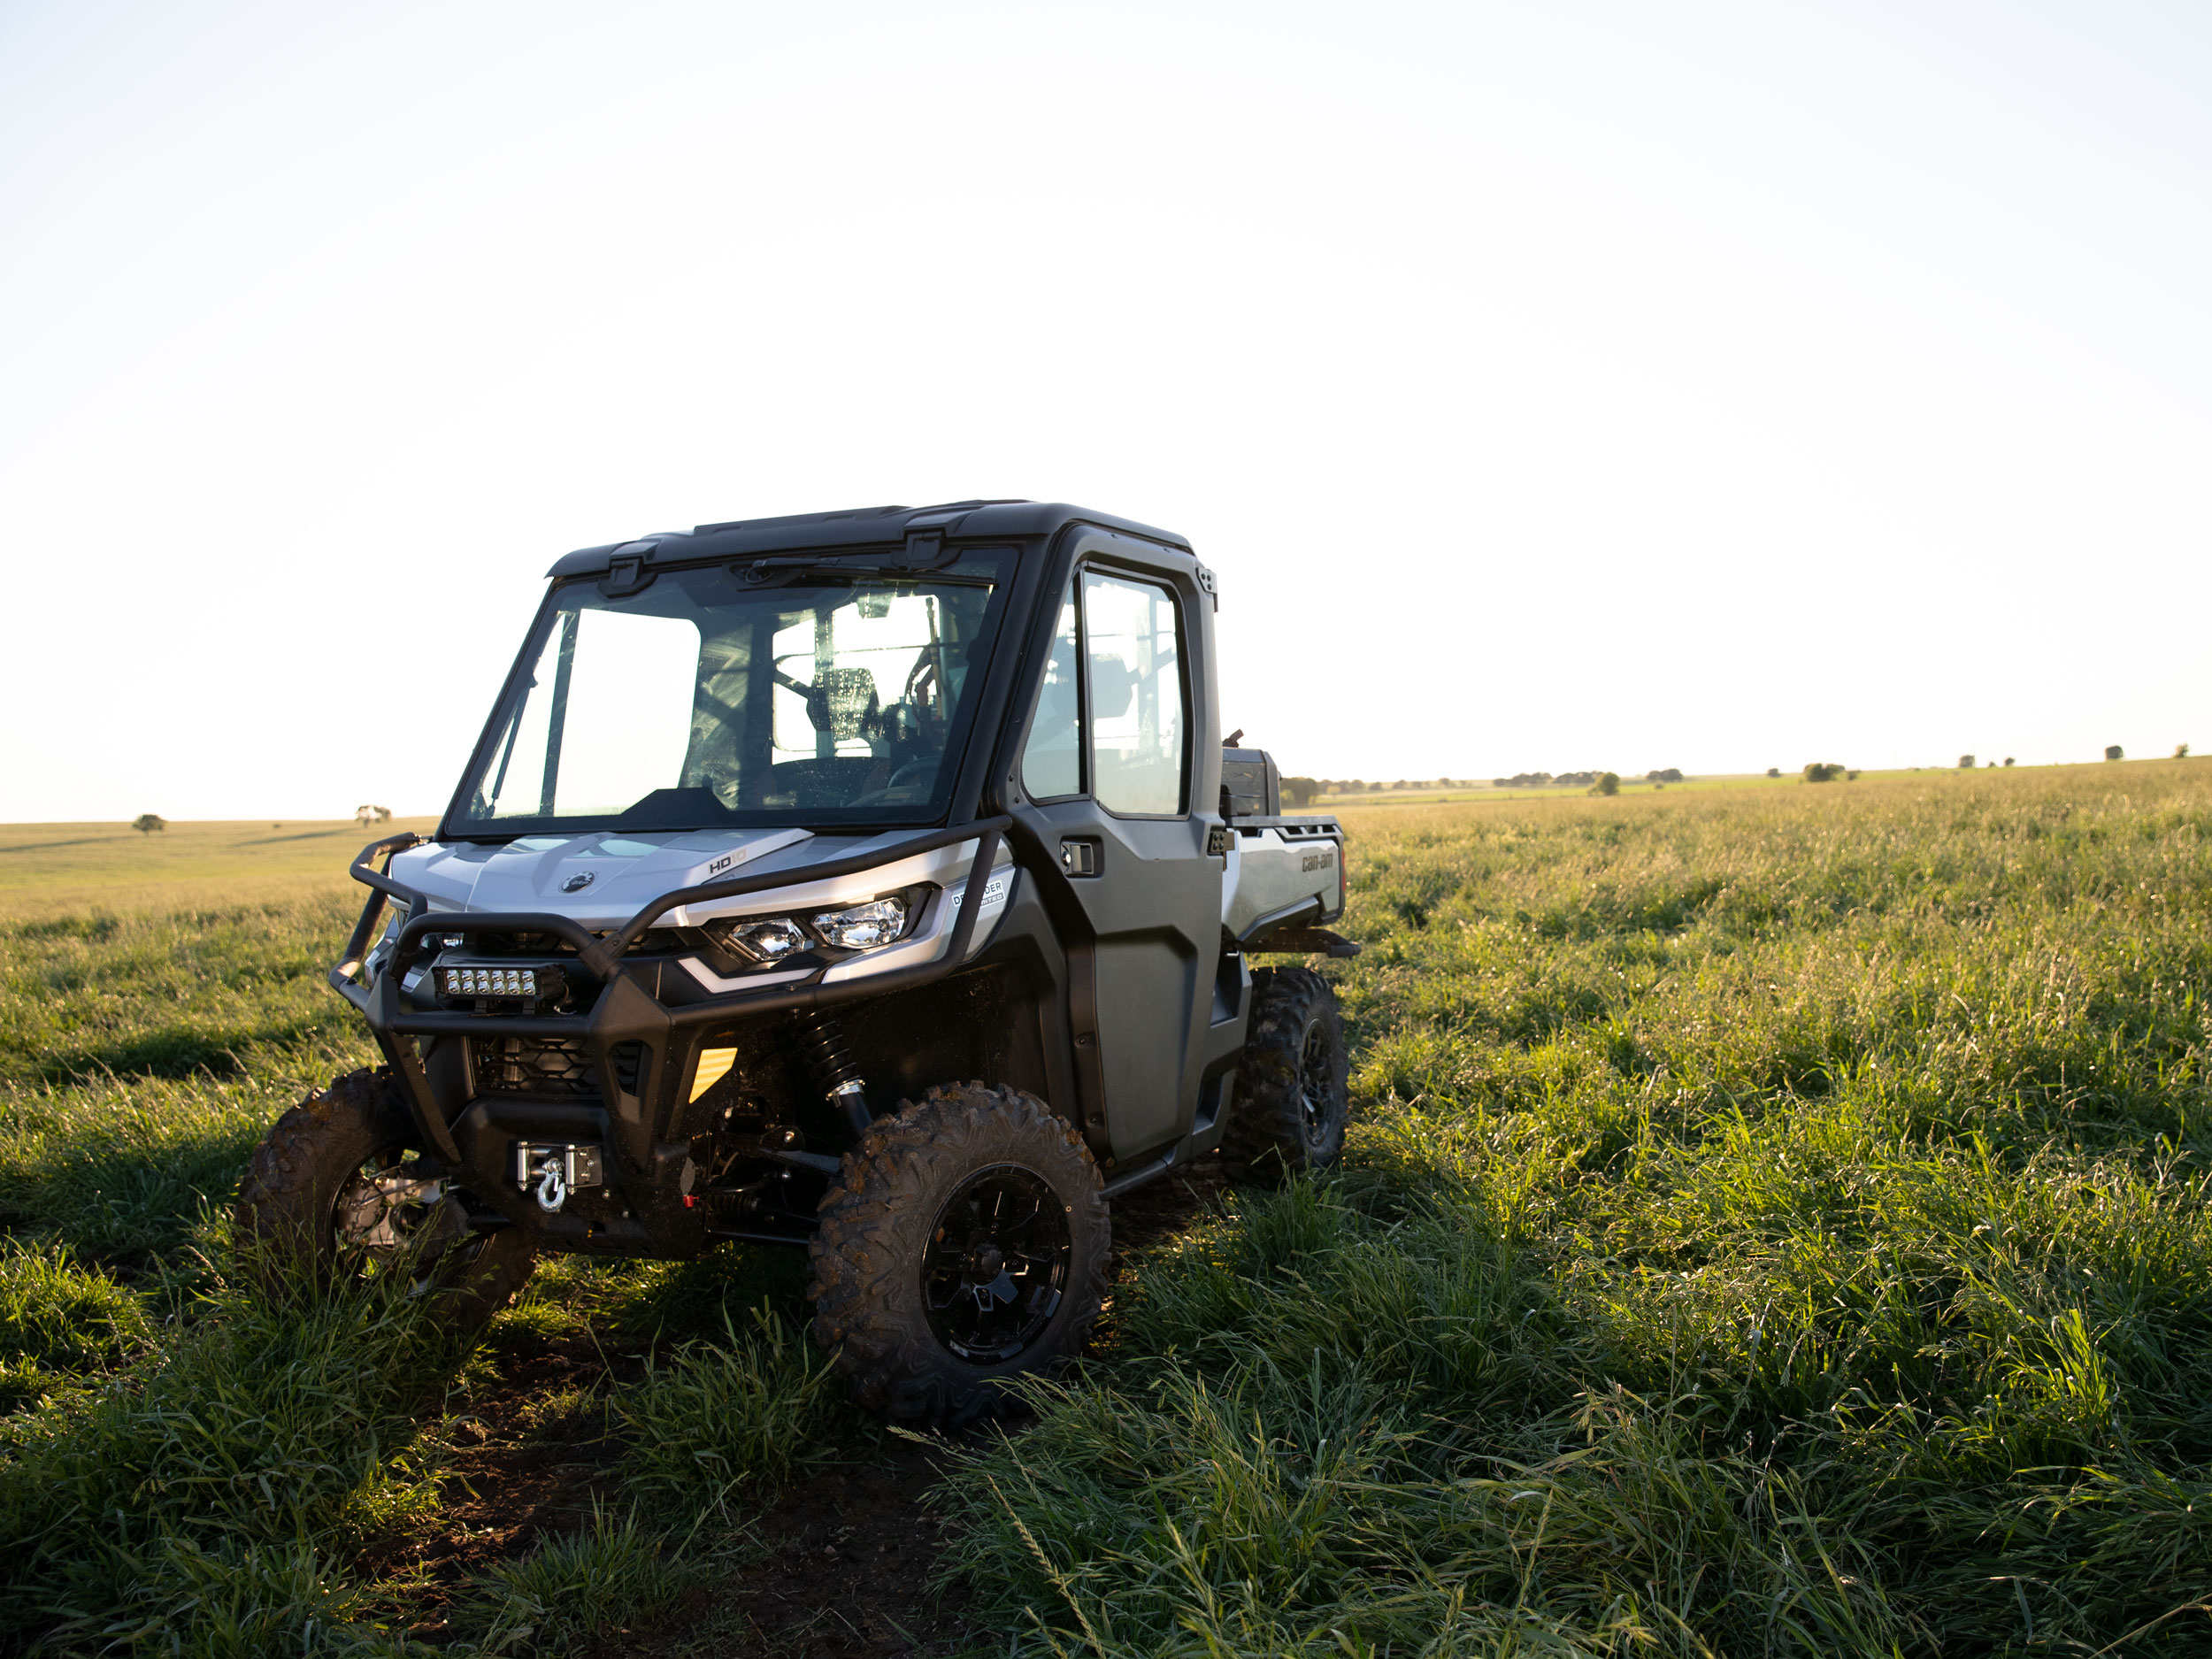 CanAm OffRoad SidebySides (SxS) for Work & Play